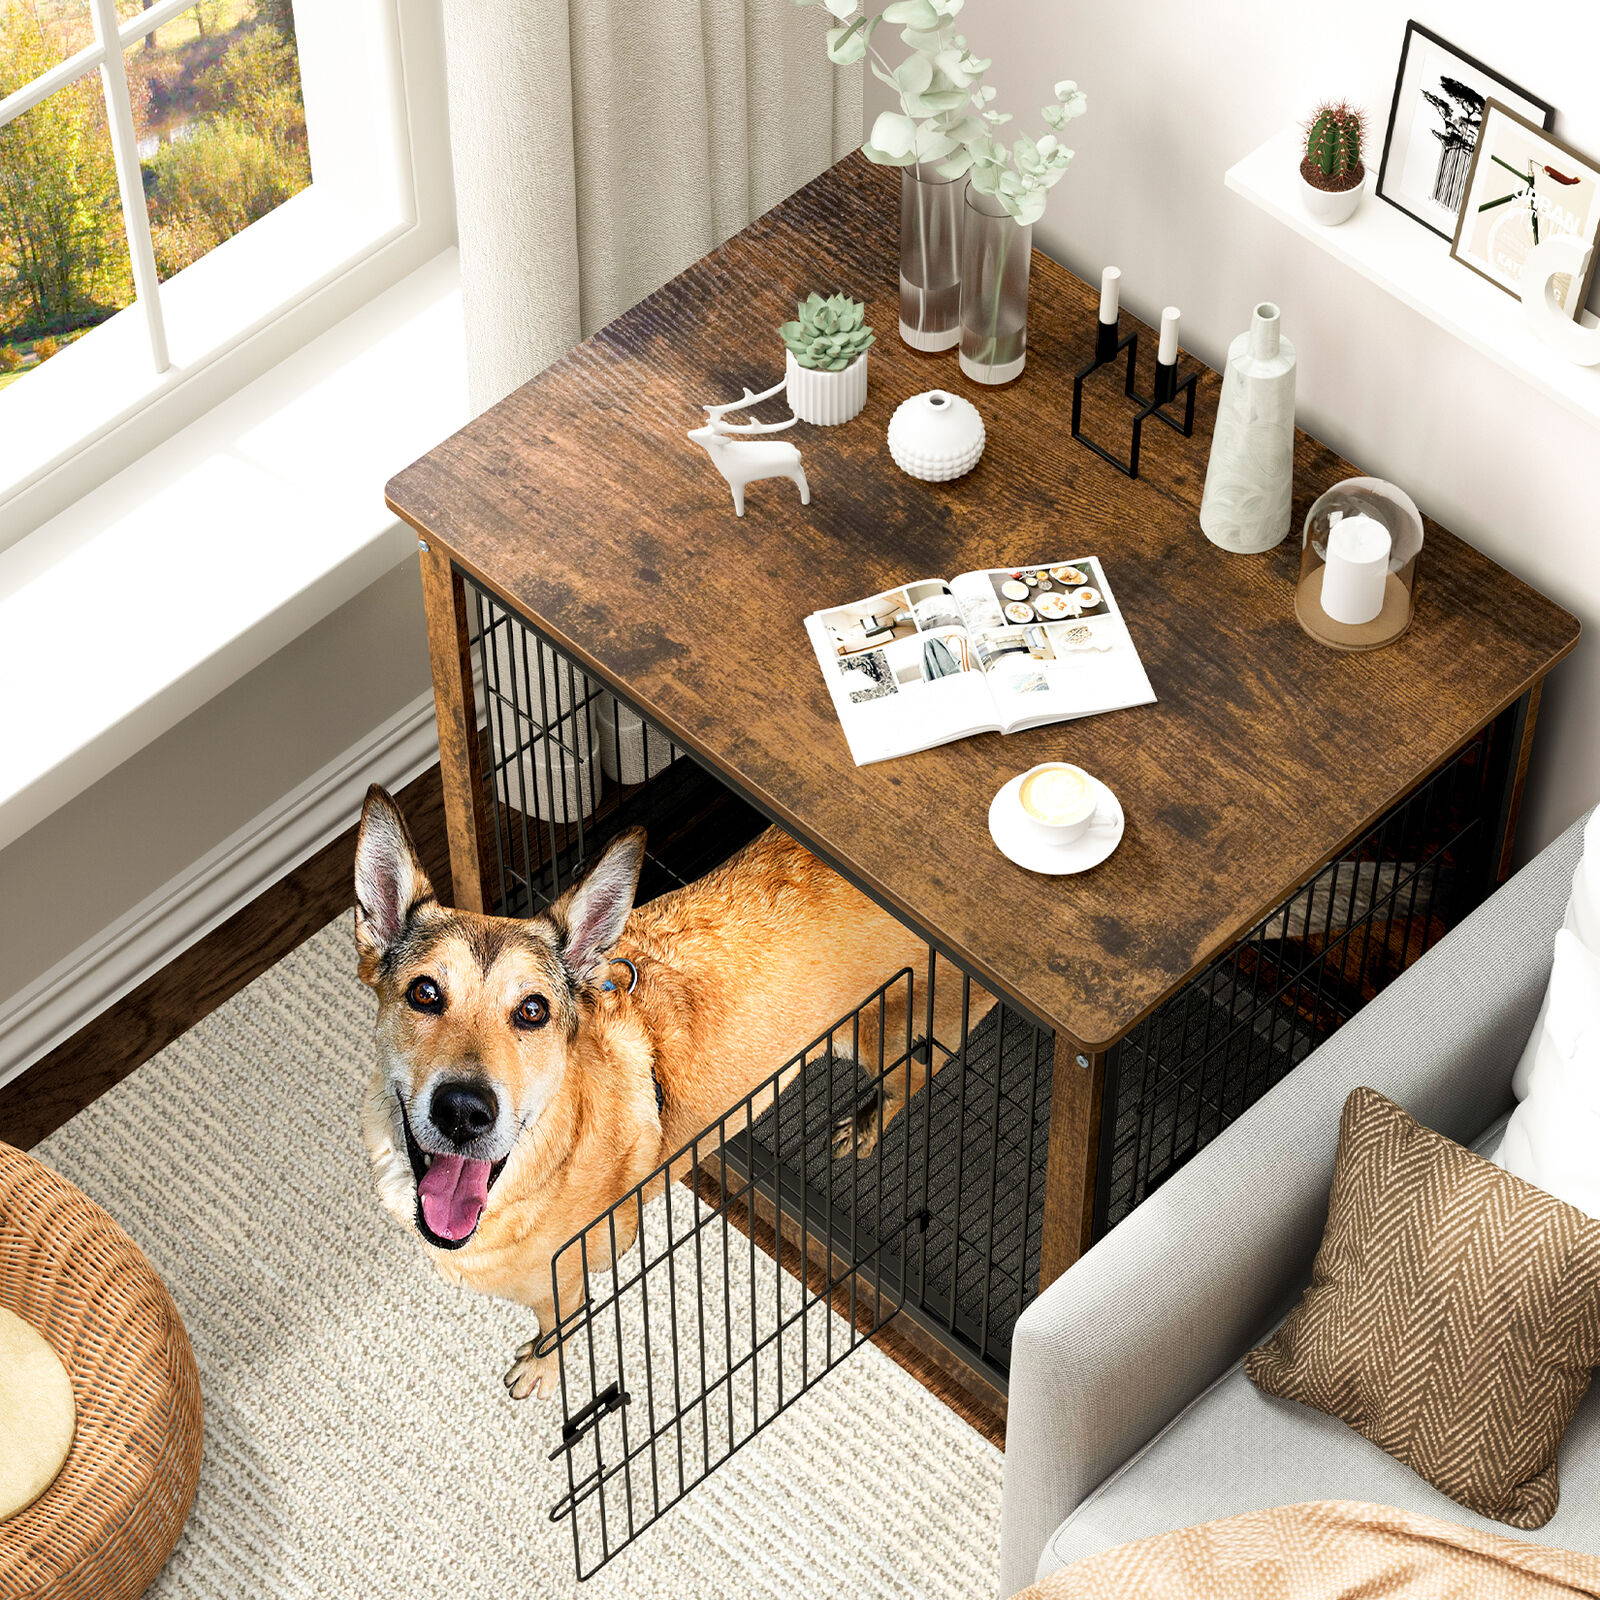 wooden dog kennel furniture, wooden dog crate, table crate dog crates